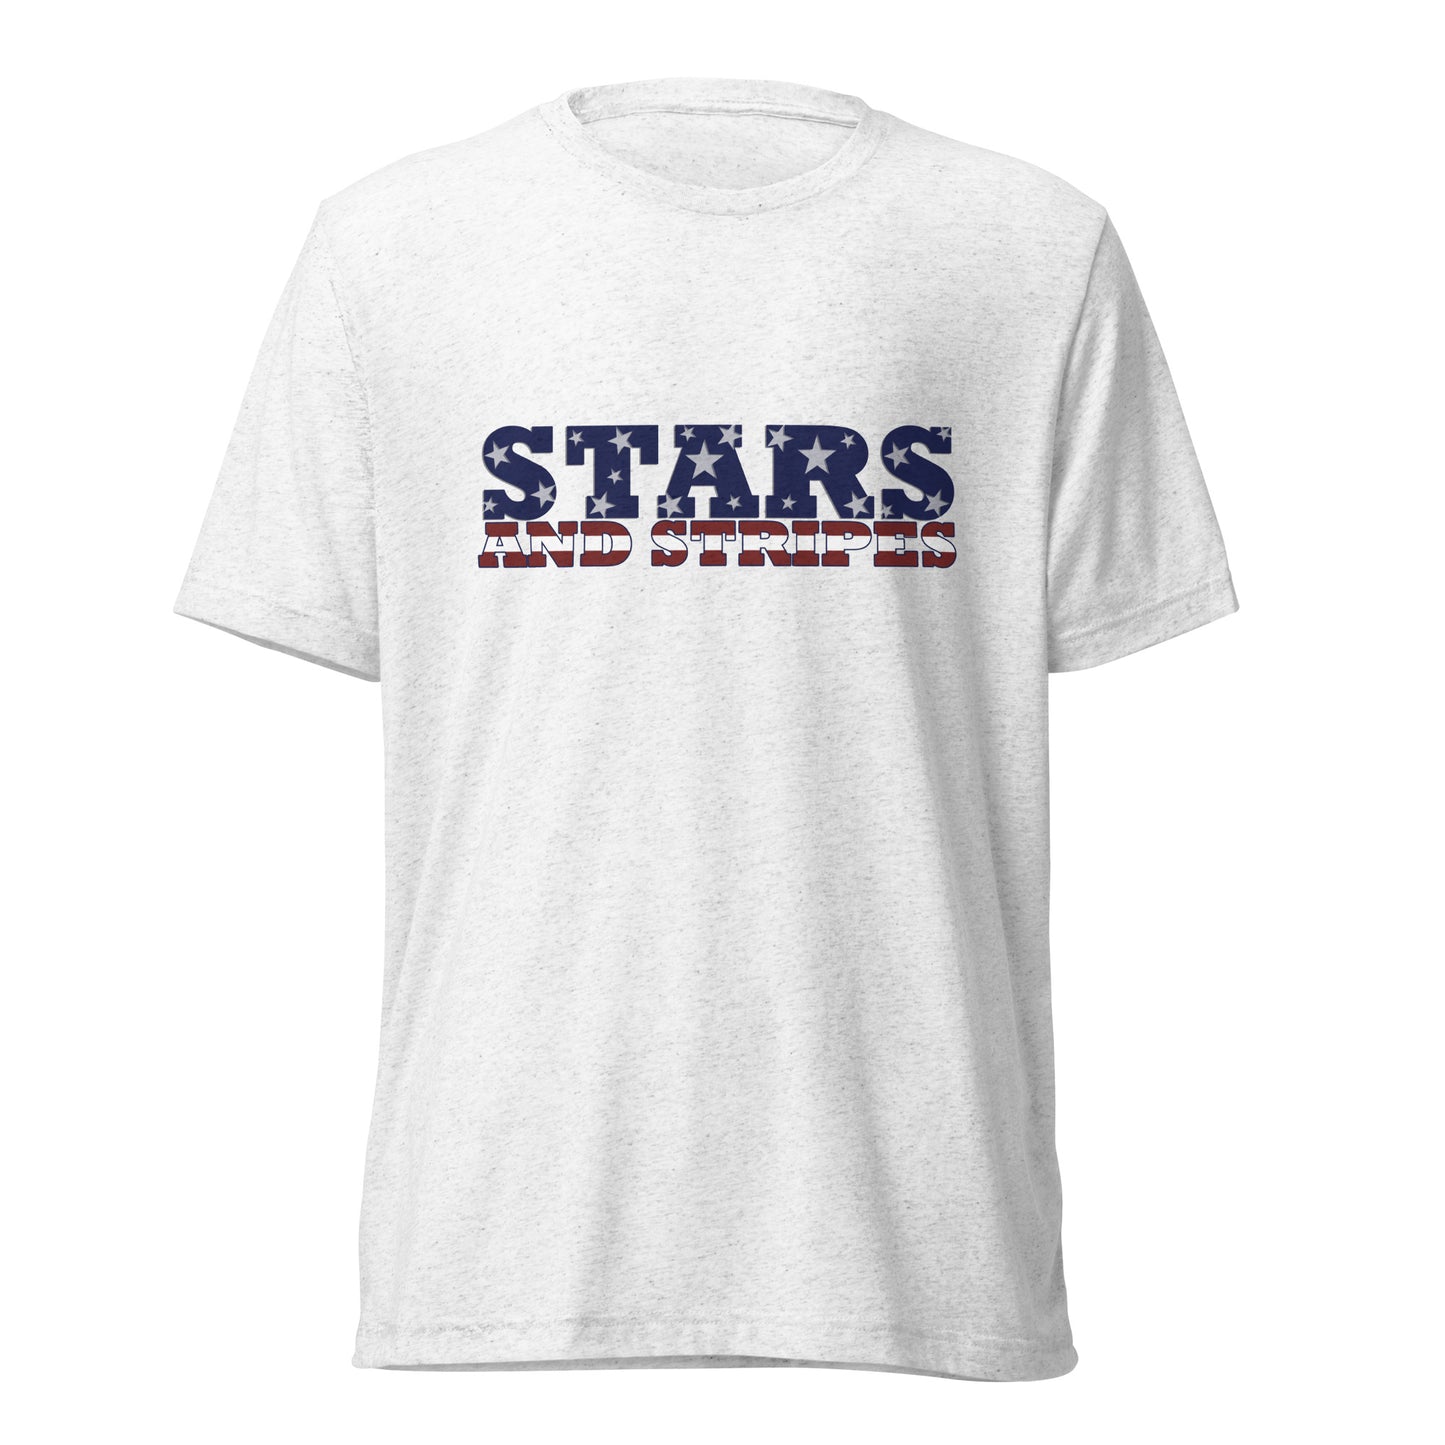 Stars and Stripes Tees